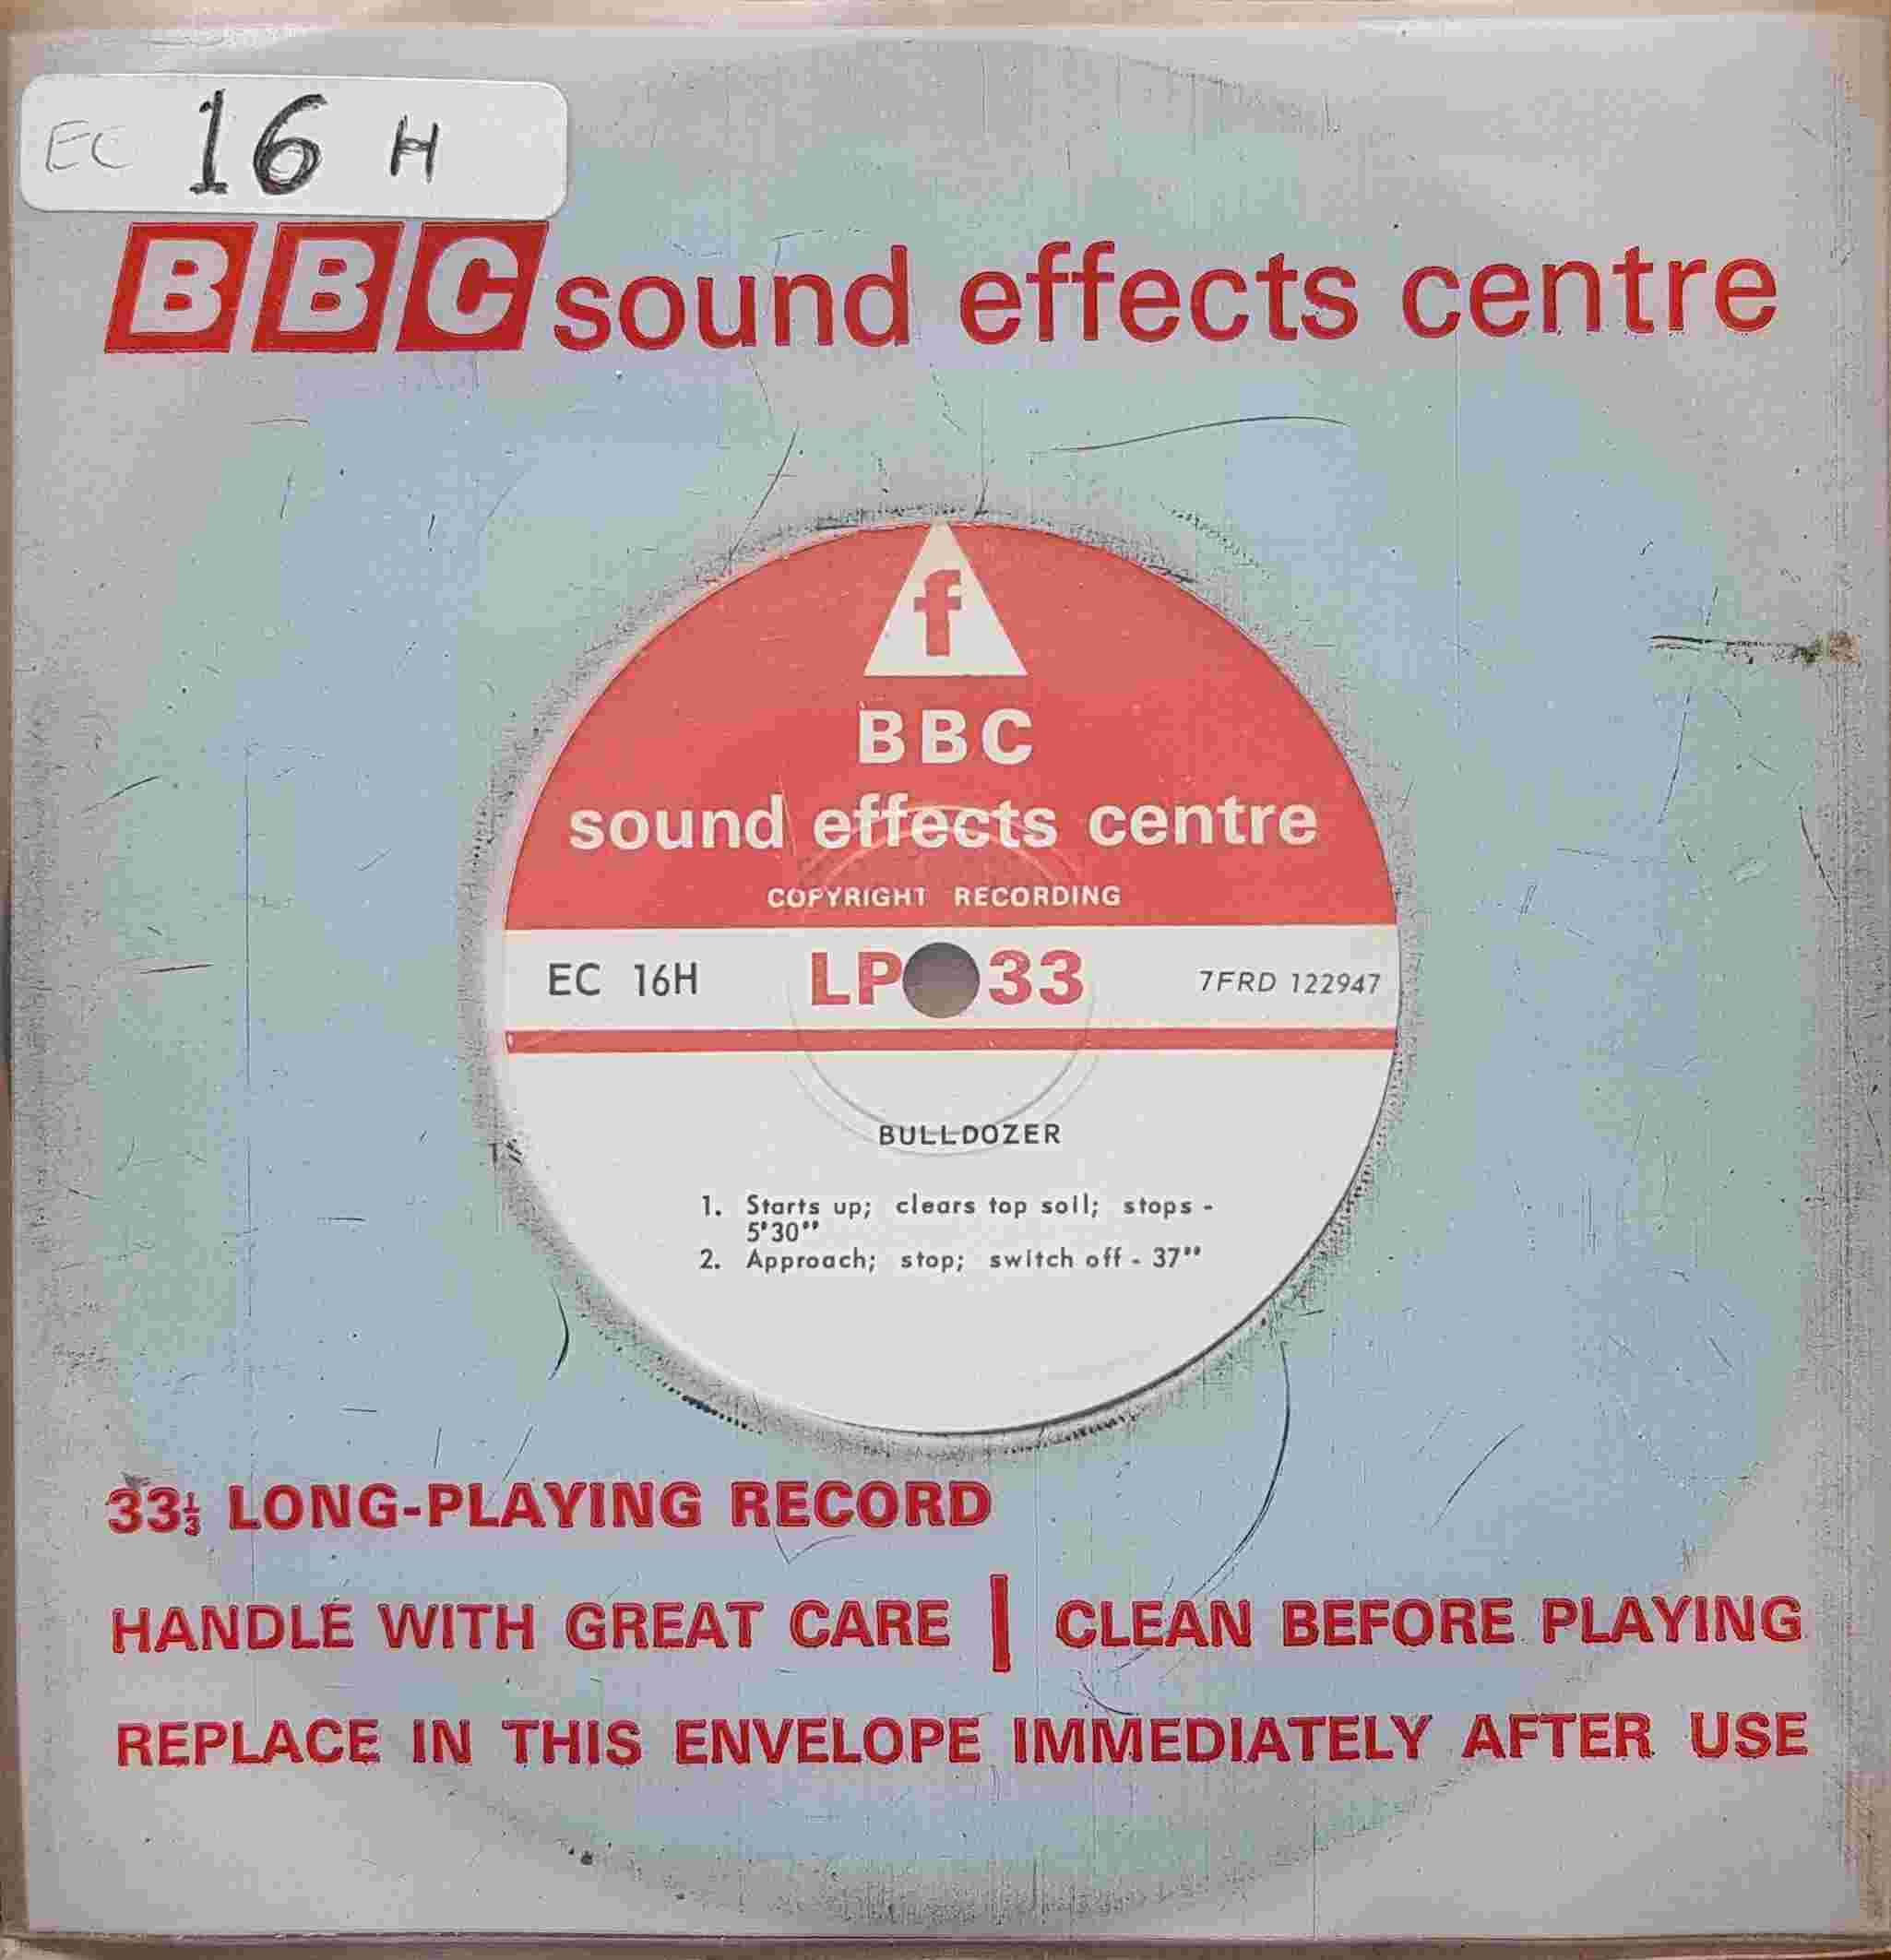 Picture of EC 16H Bulldozer / Excavators & pumps by artist Not registered from the BBC singles - Records and Tapes library